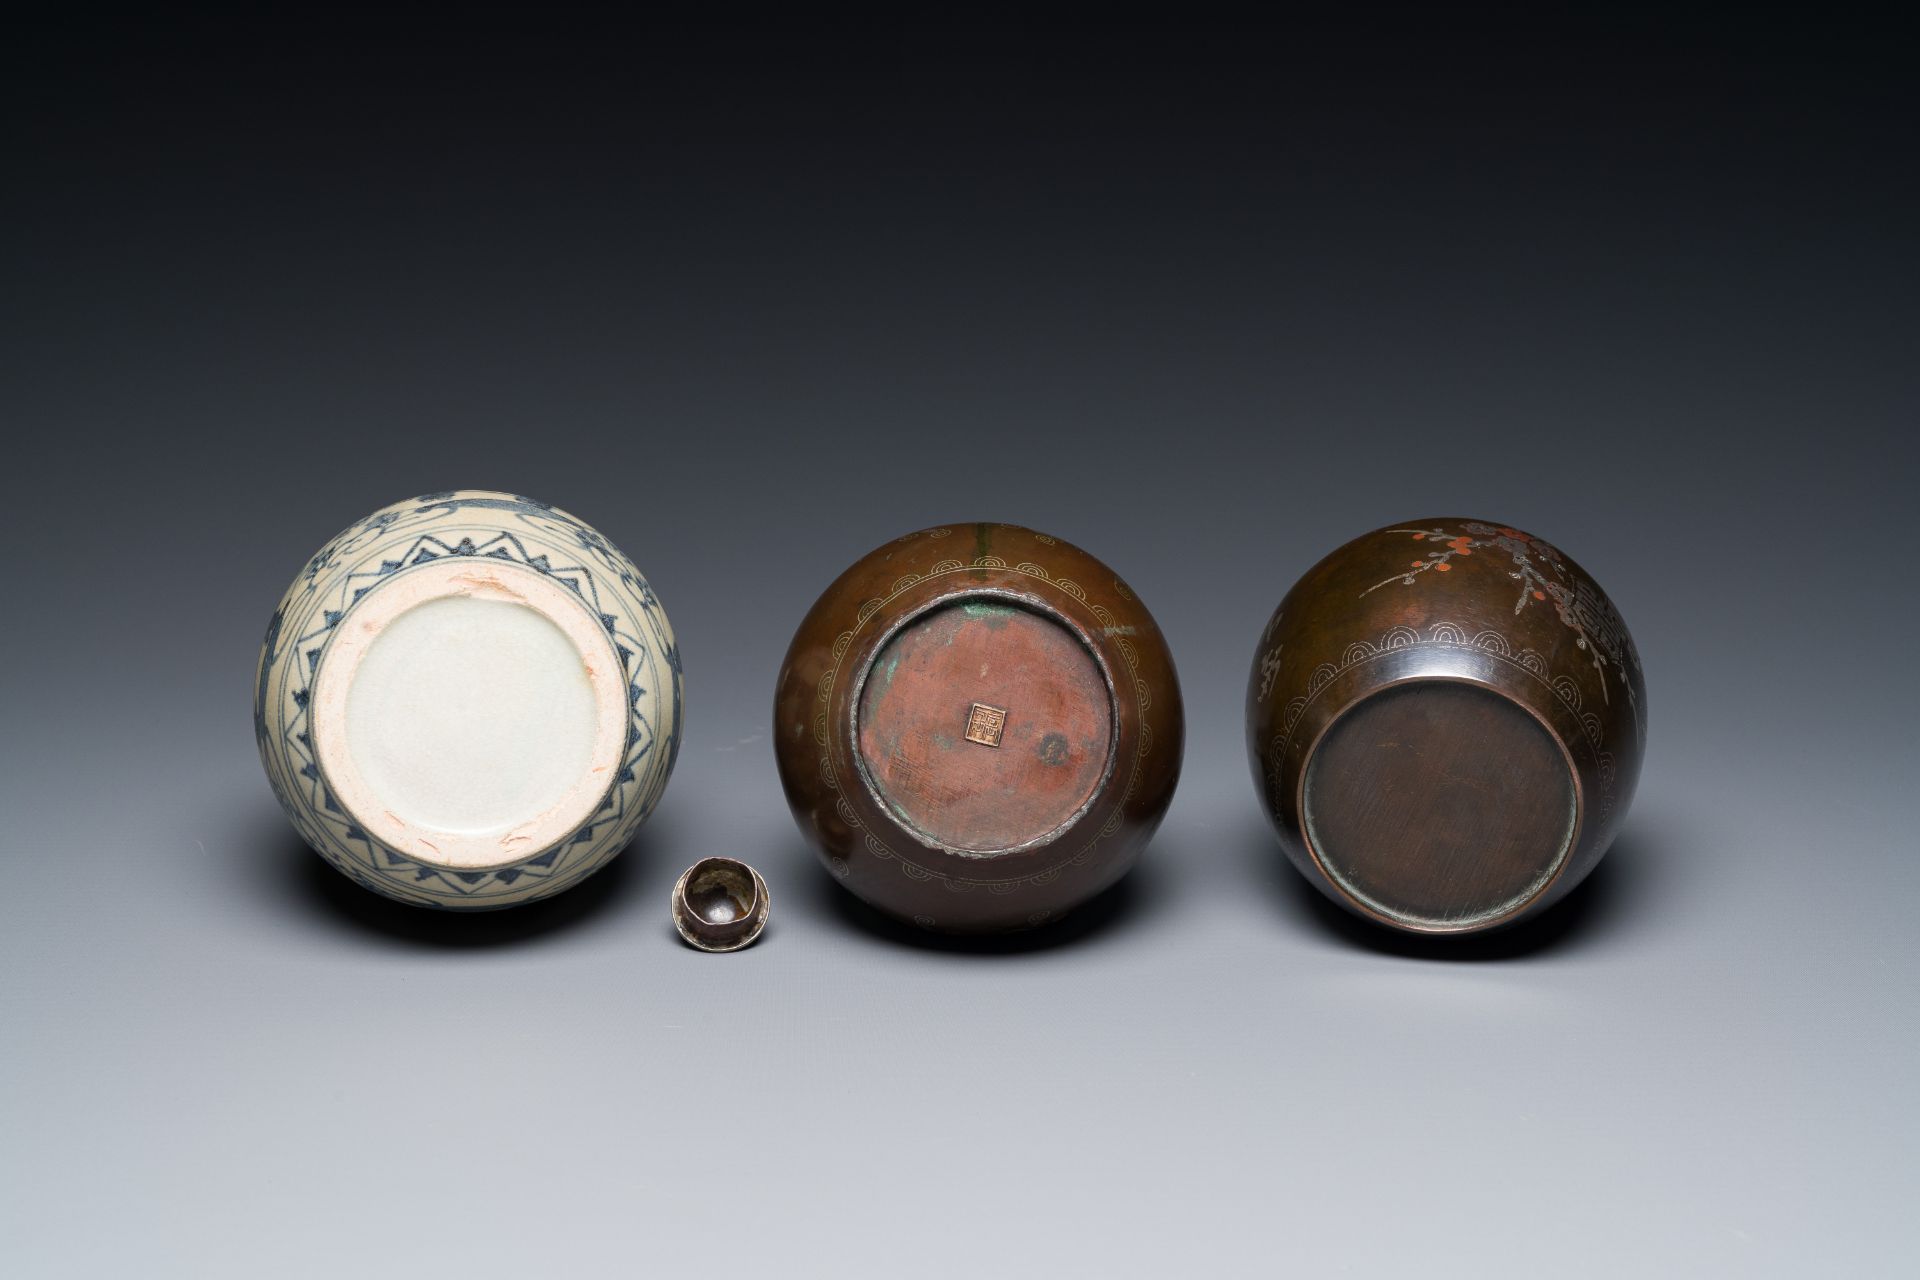 Two Vietnamese copper- and silver-inlaid paktong wares and a Chinese blue and white double gourd vas - Image 7 of 7